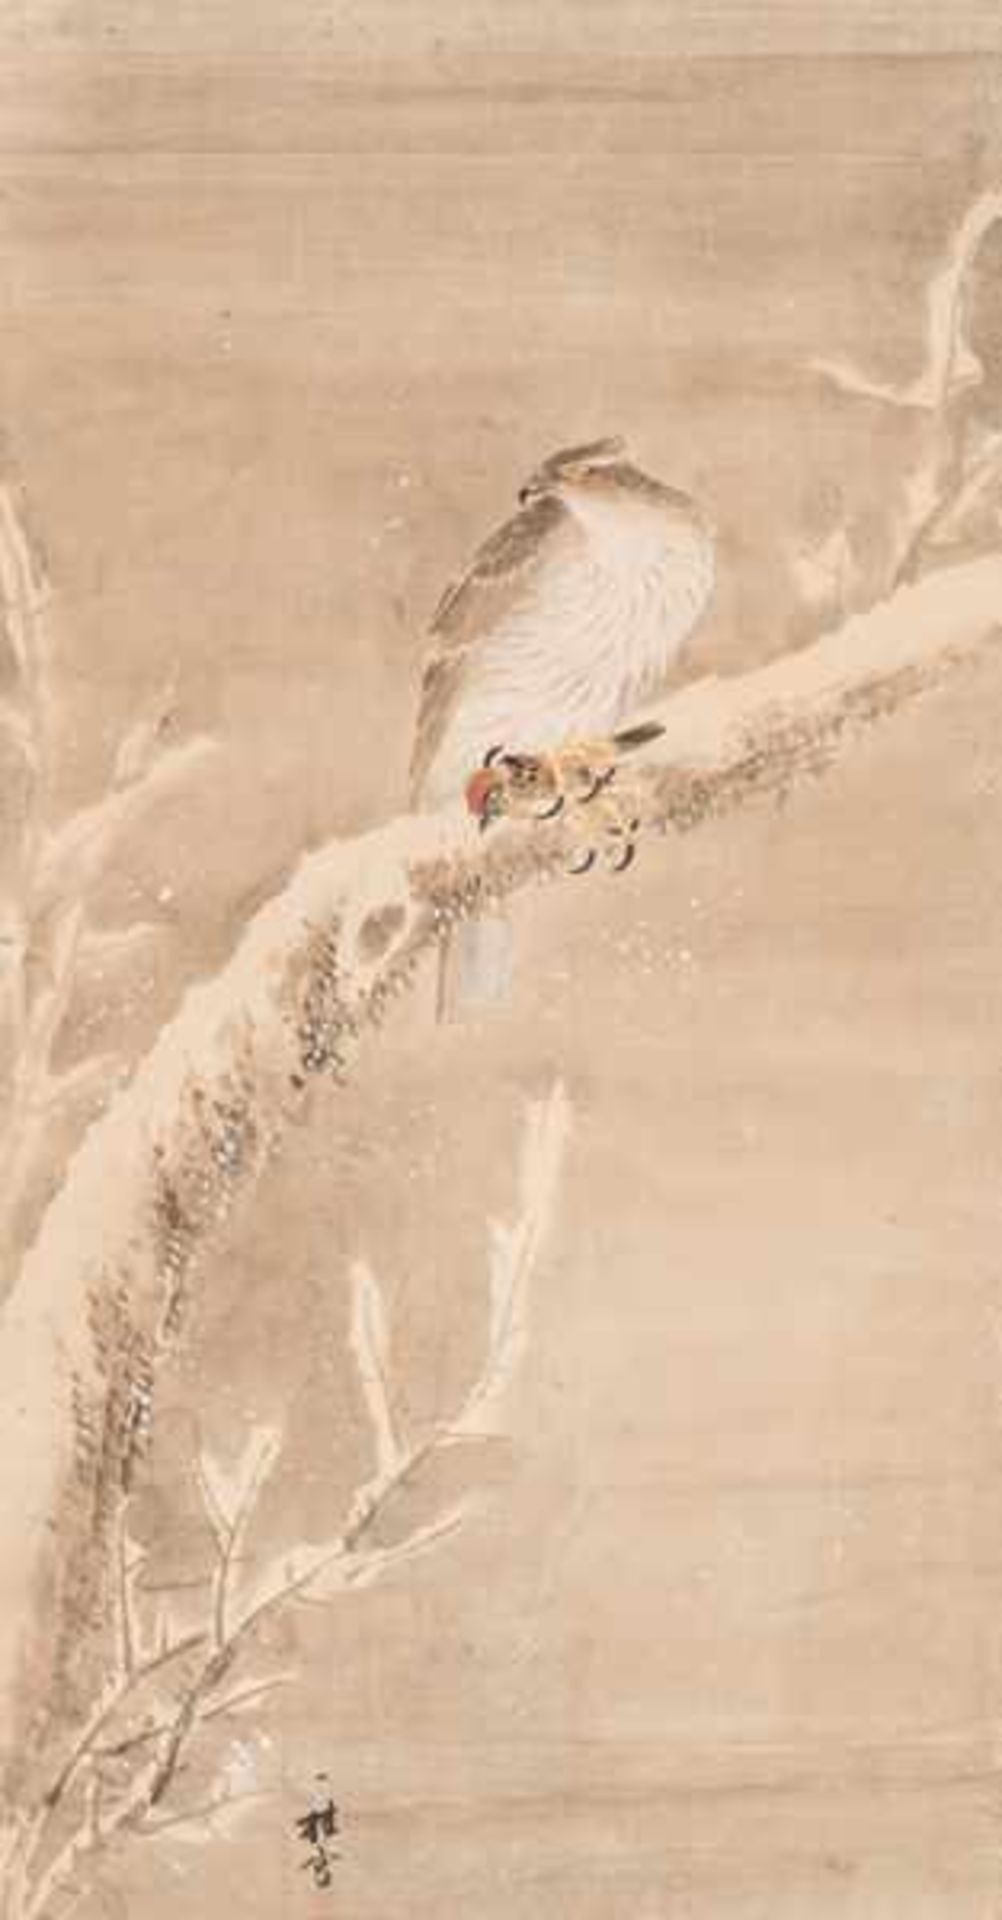 A PAINTING OF A FALCON WITH SPARROW Colors and ink on paper. Japan, 19th centuryDepicting a falcon